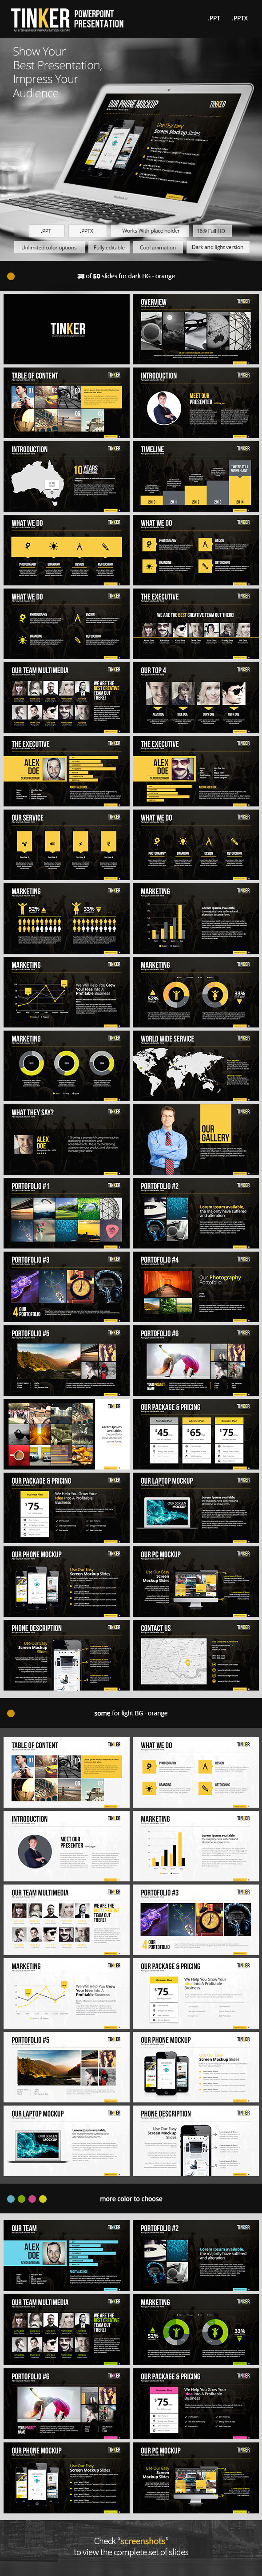 TINKER - Powerpoint Template